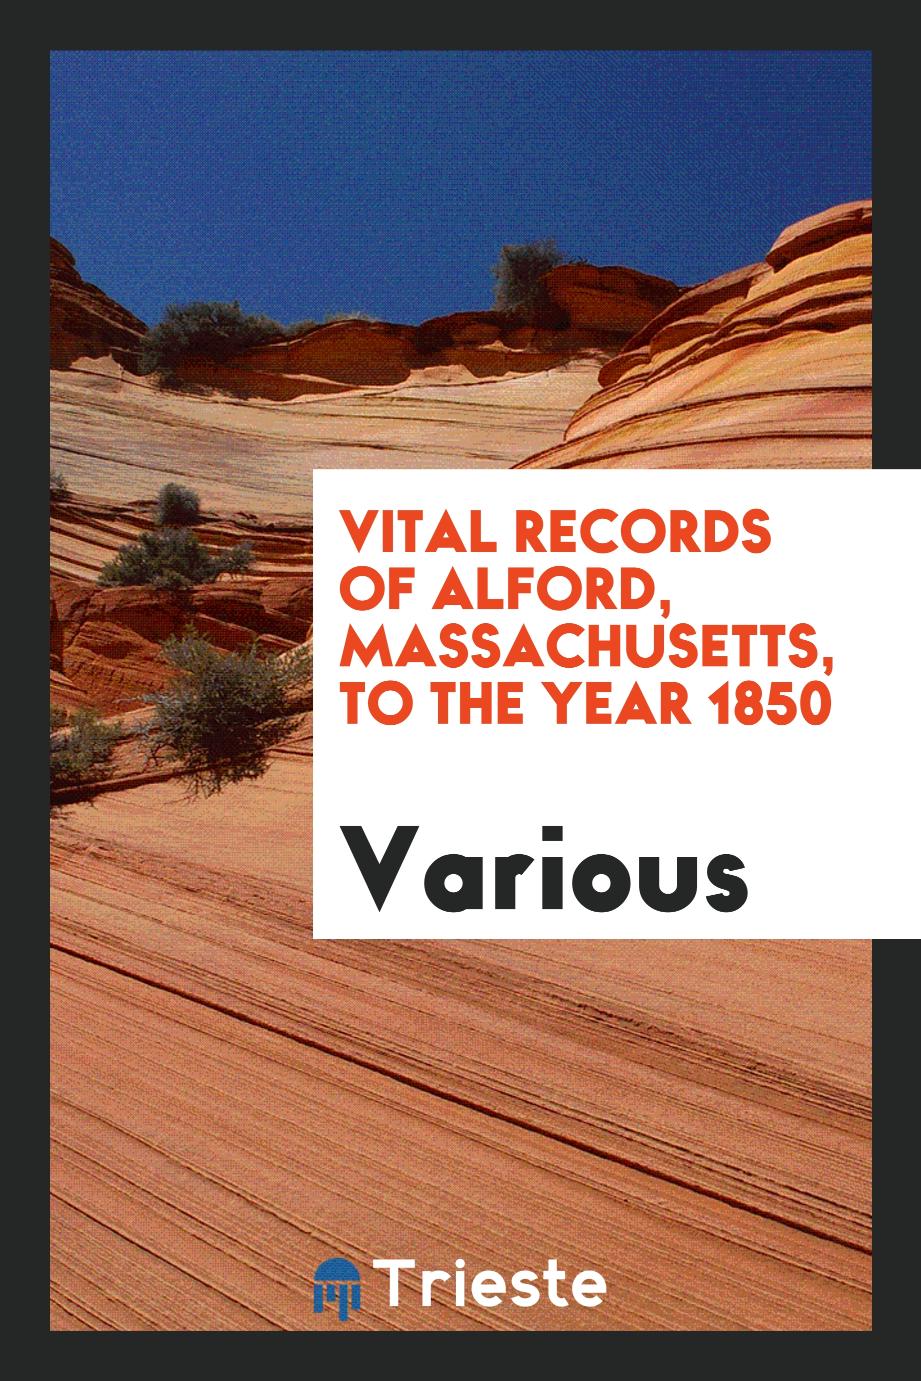 Vital Records of Alford, Massachusetts, to the Year 1850